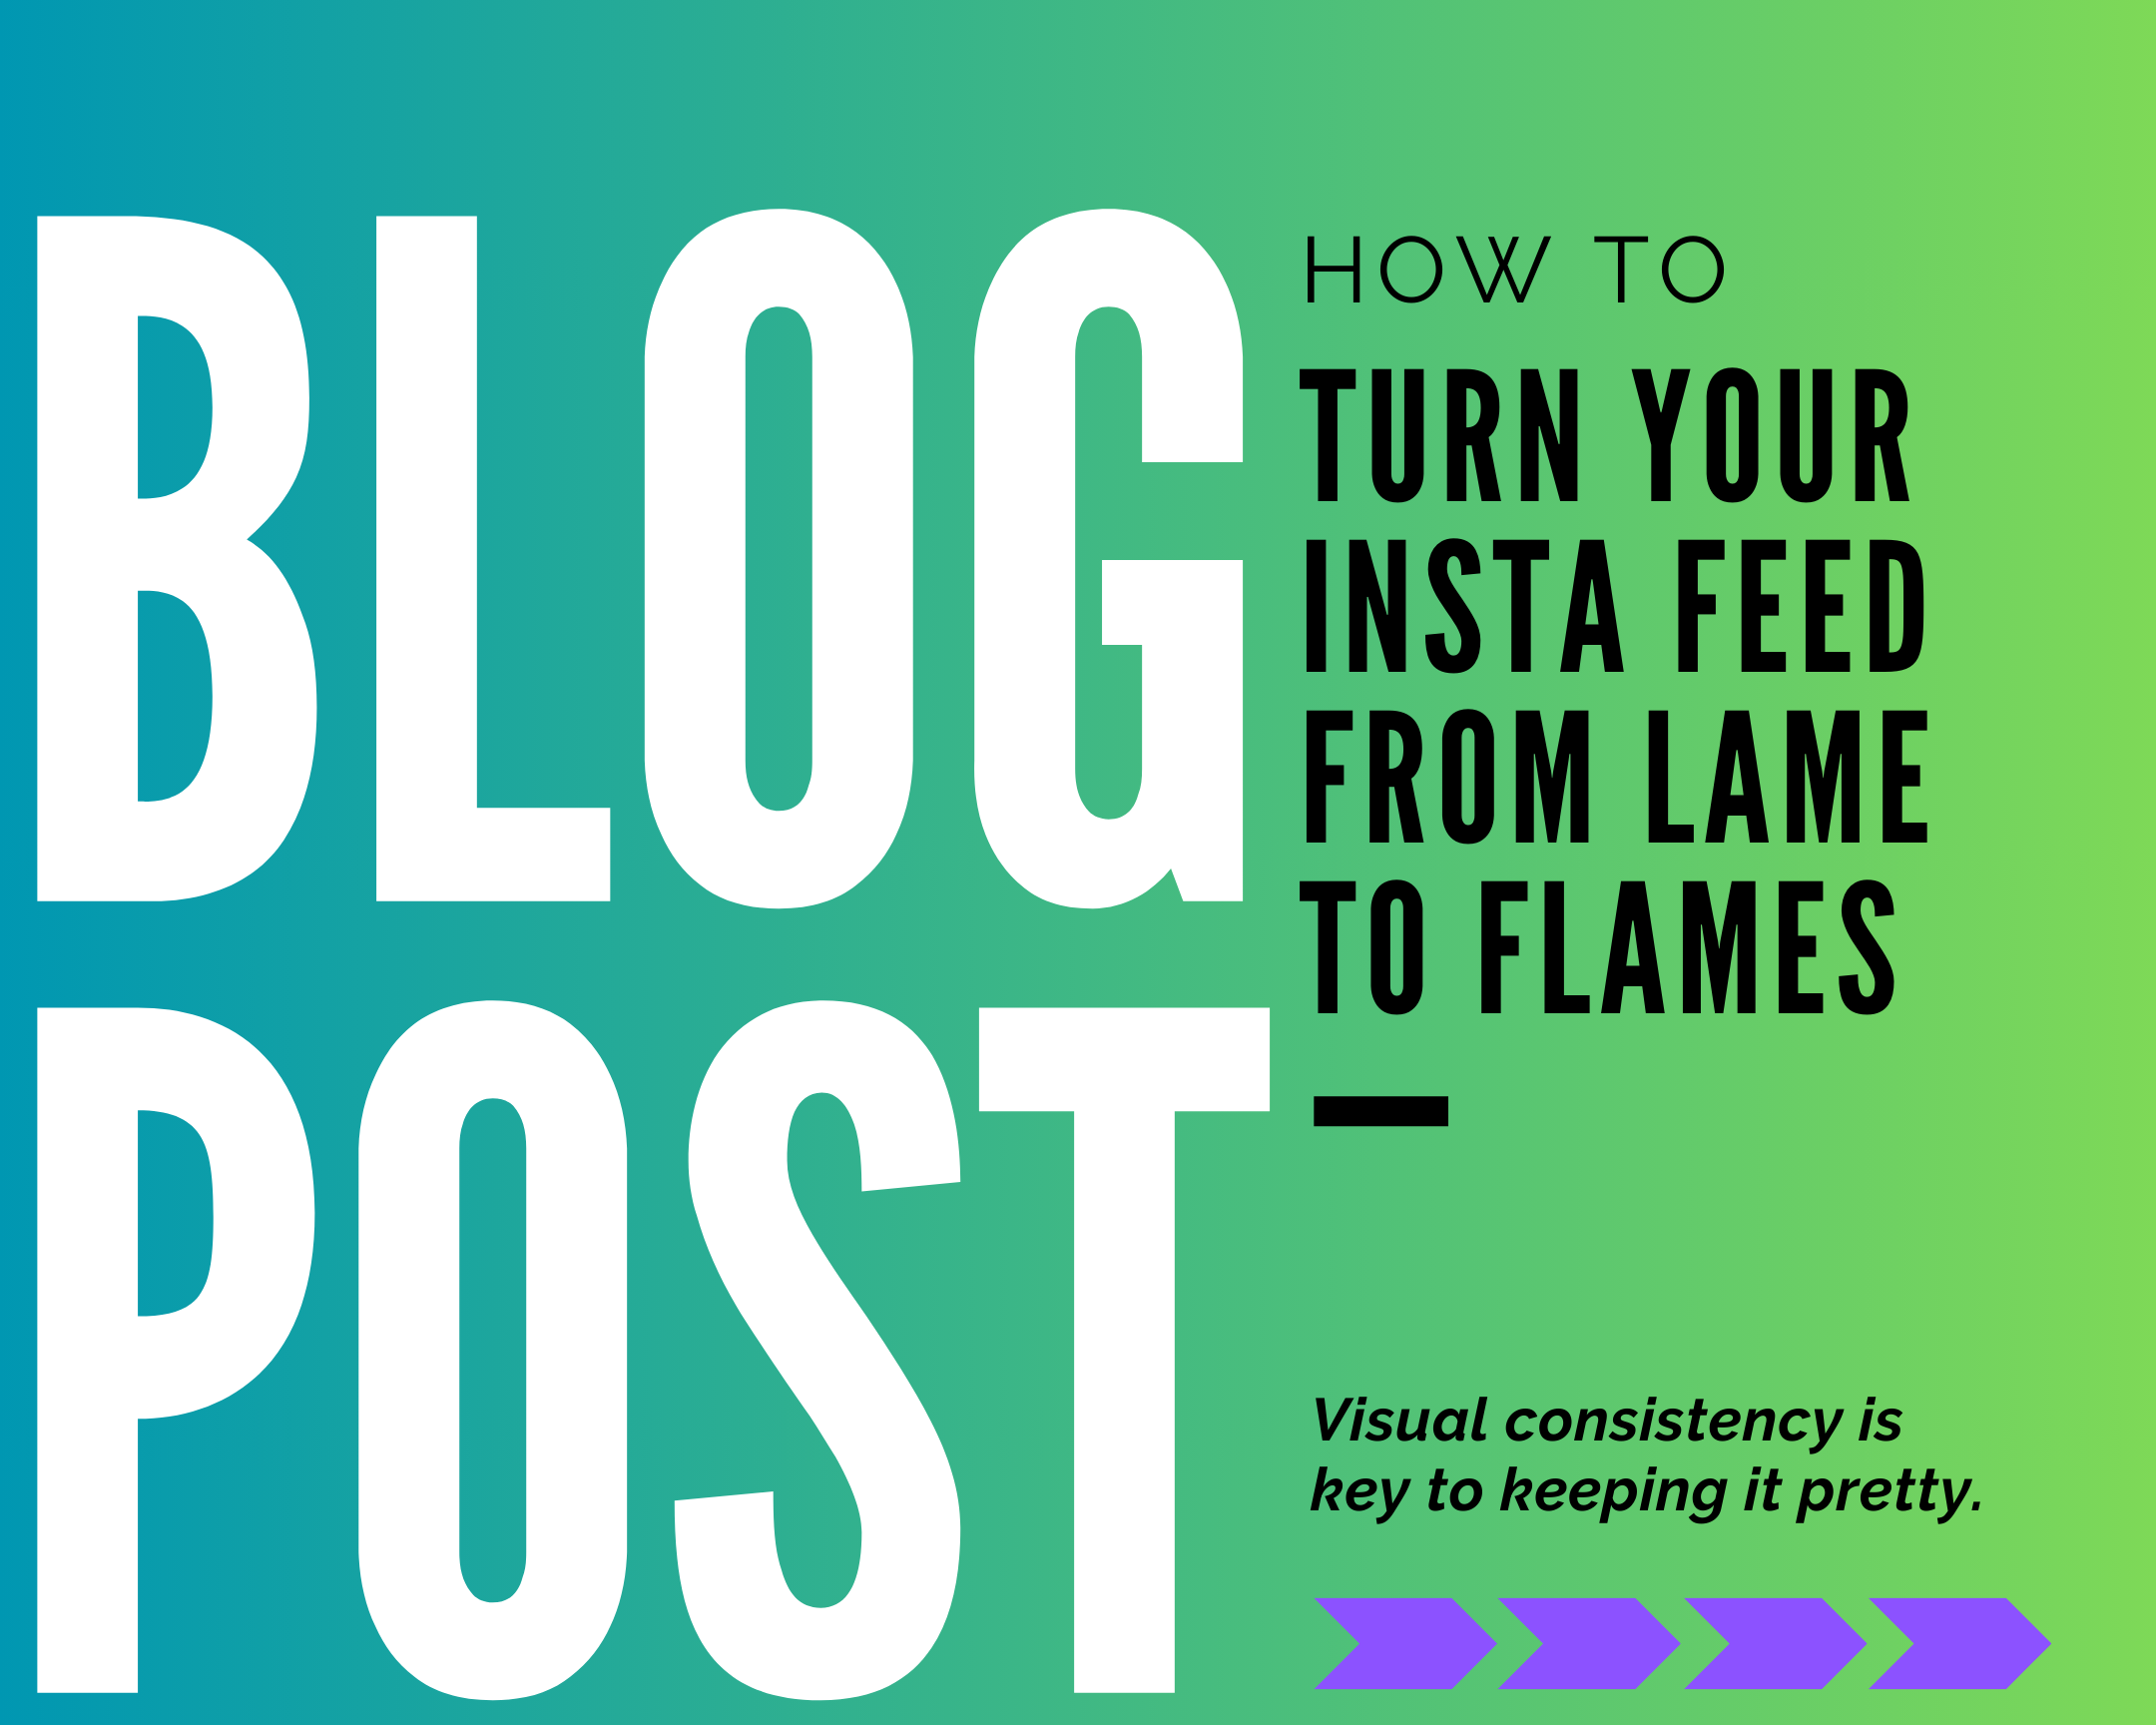 Levelling up: 3 ways to turn your Insta feed from lame to flames